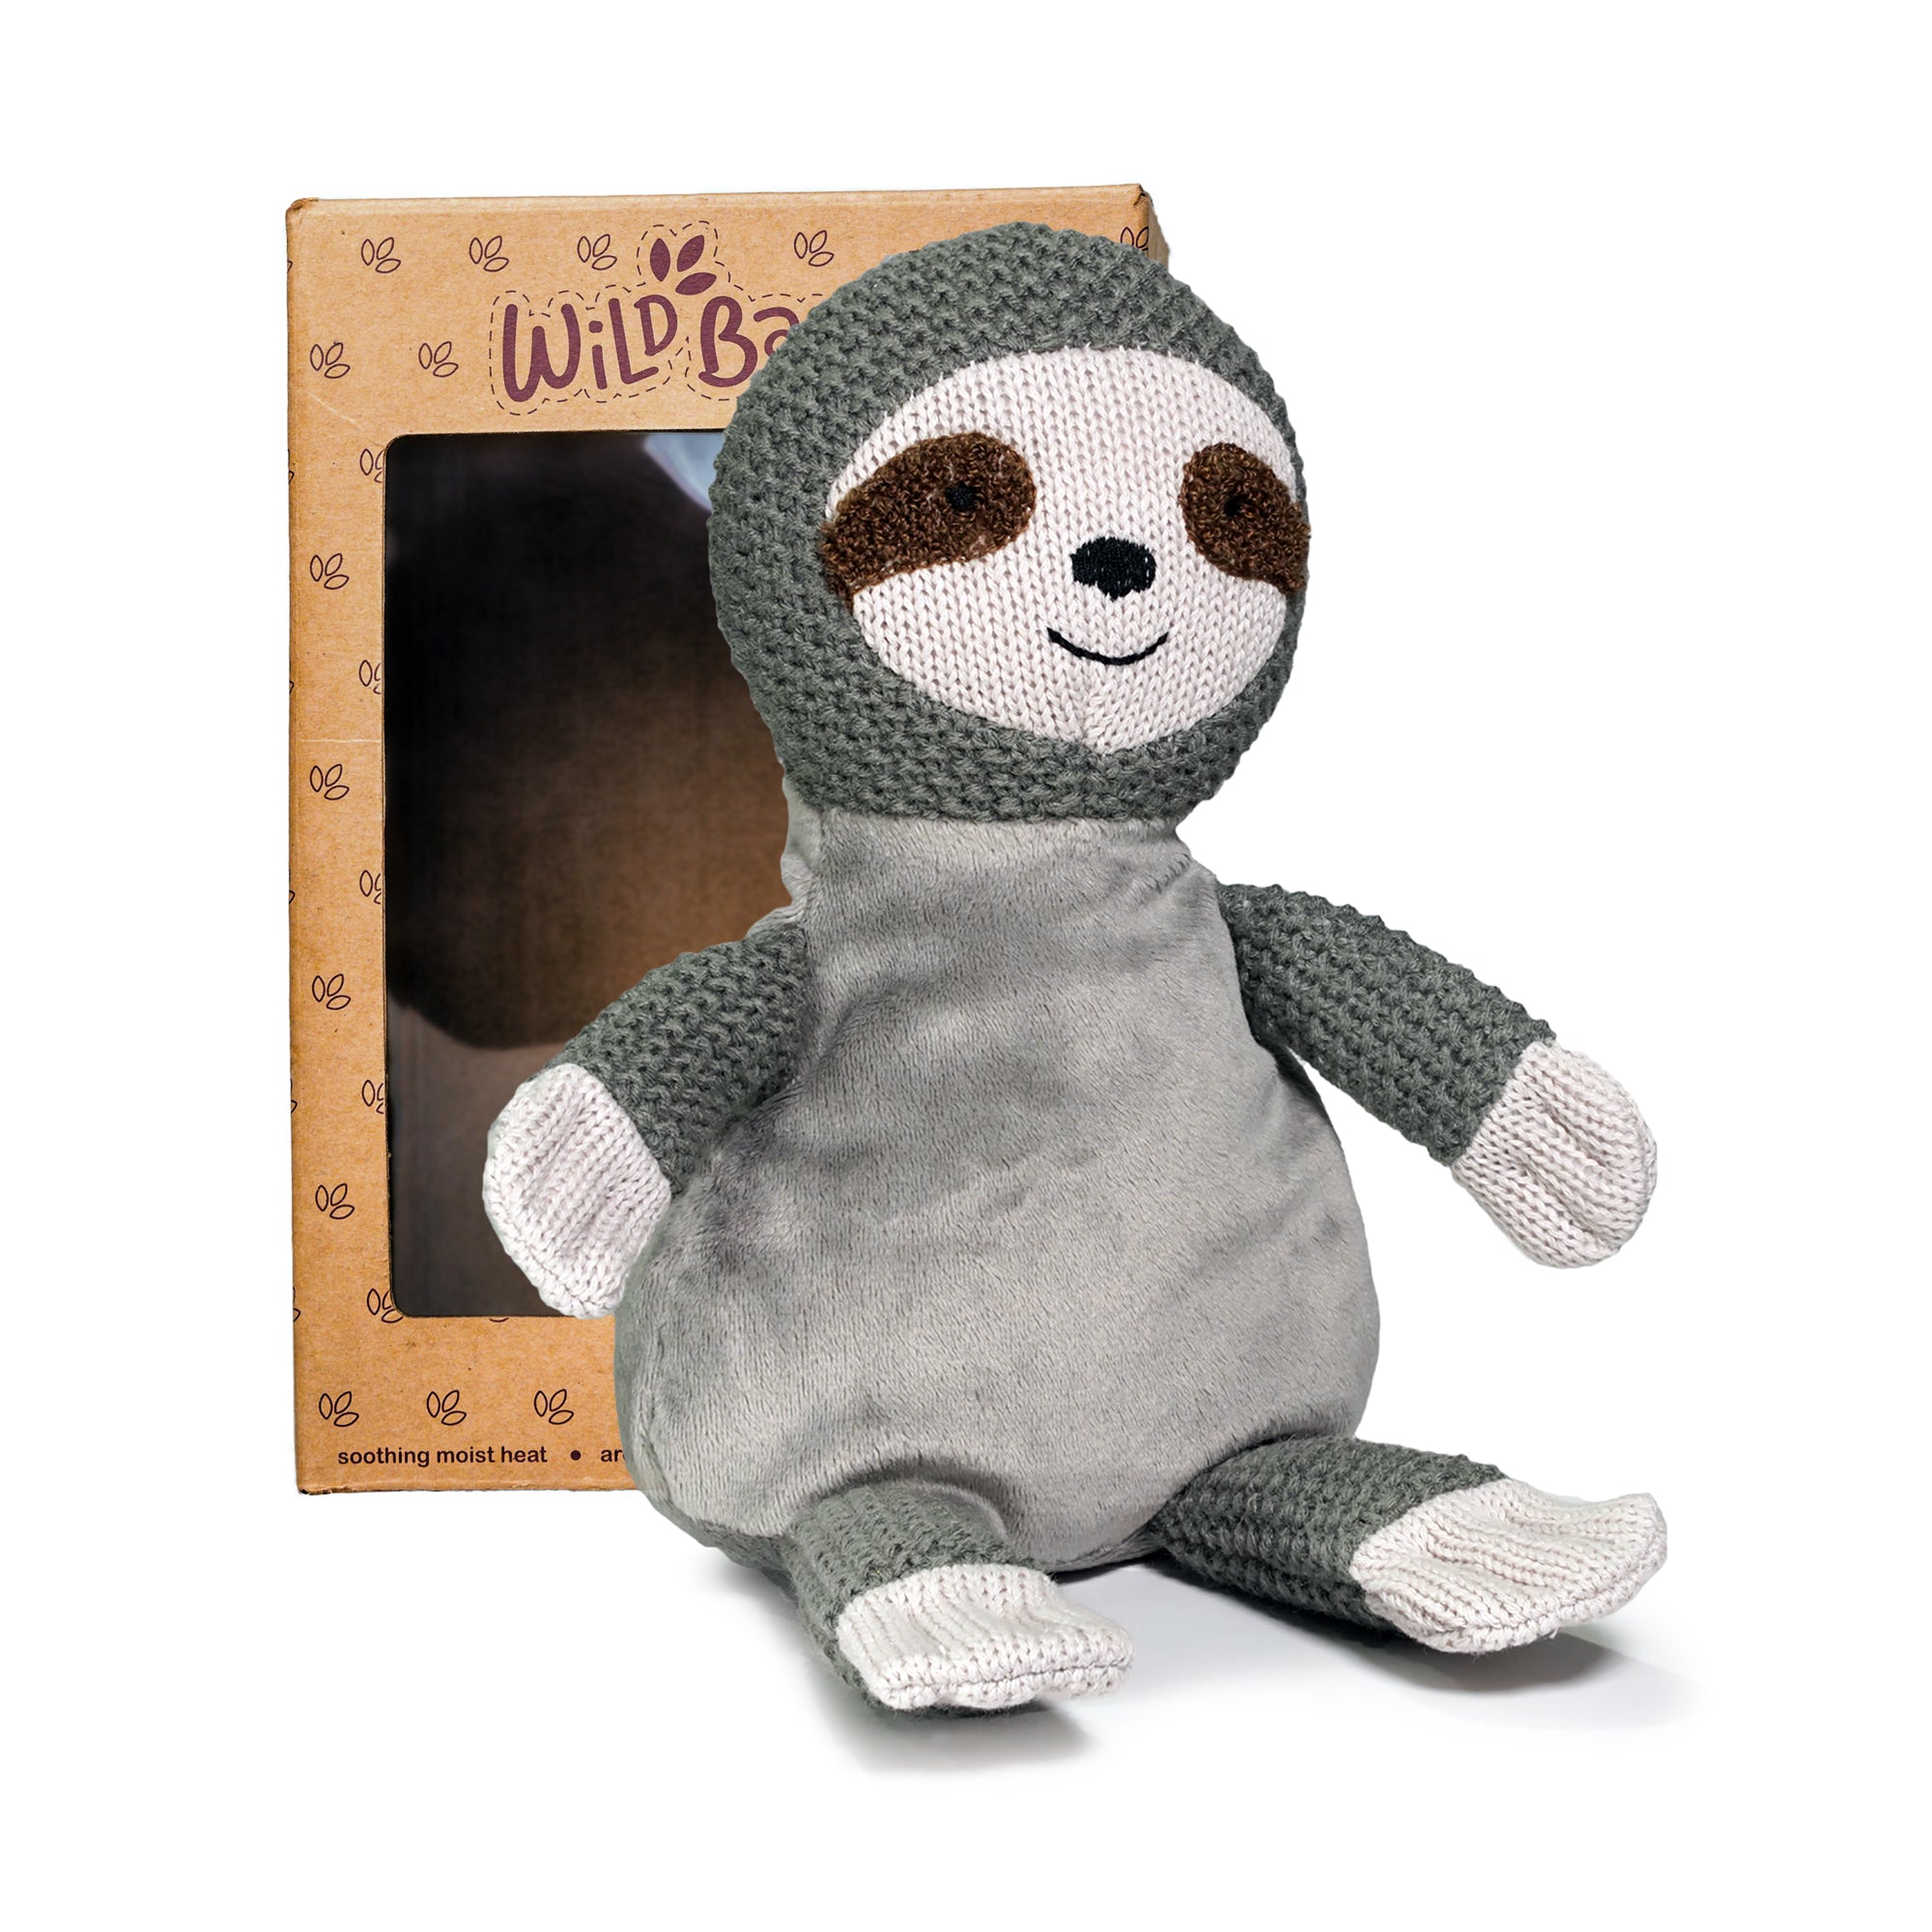 Sloth Stuffed Animal - Heatable Plush with Hot Cold Pack